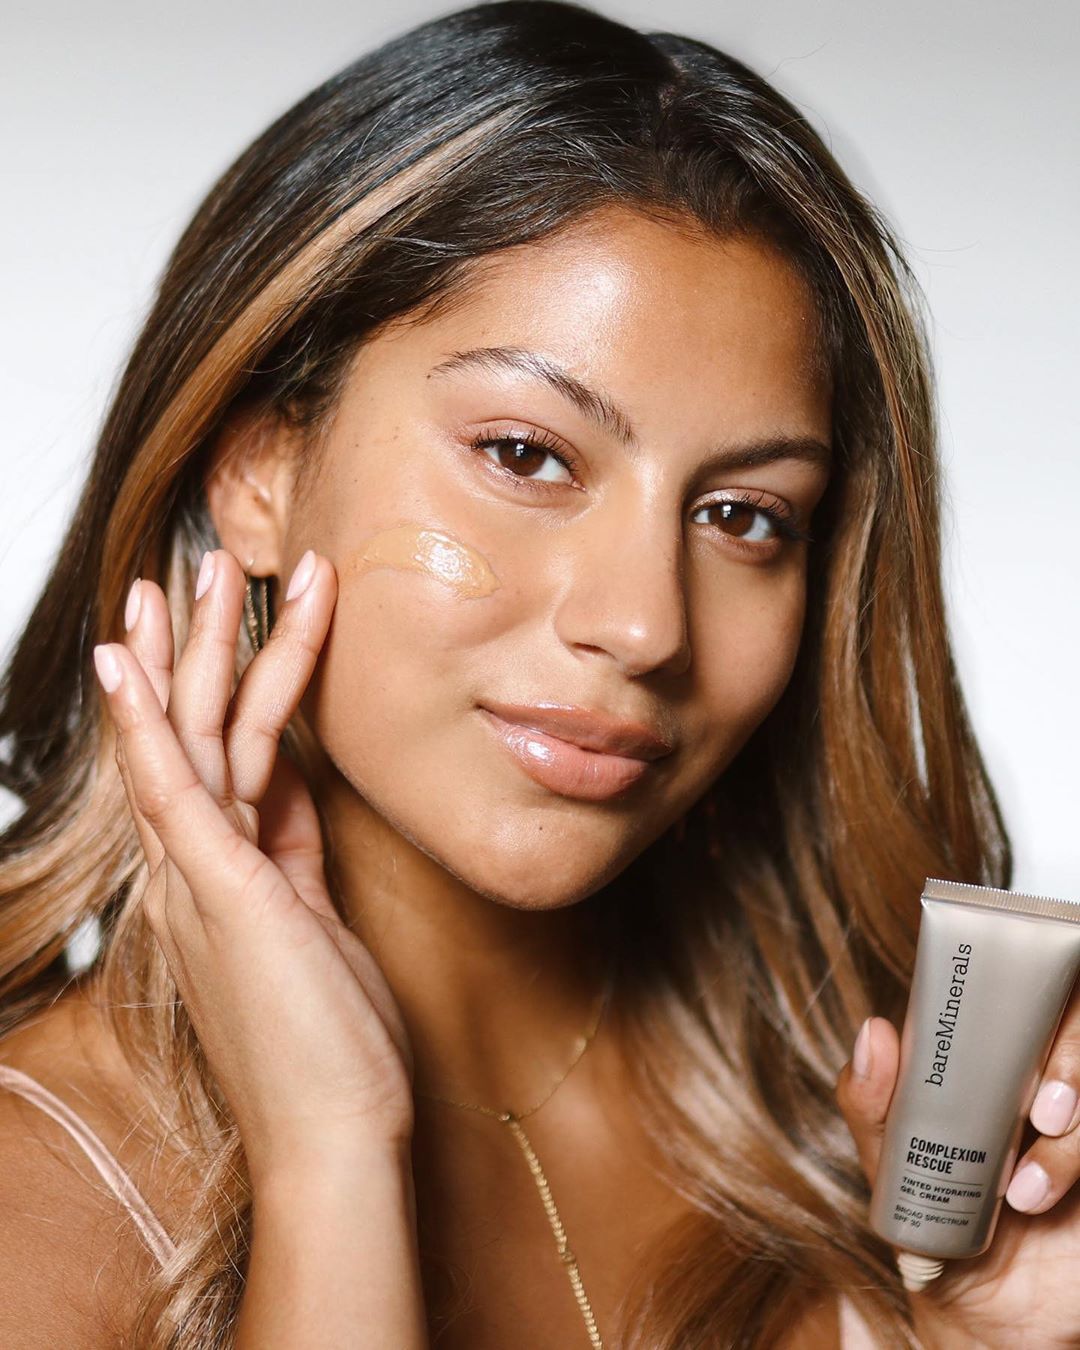 Sephora - Myth: Shade matching at home is impossible 😩Truth: @bareminerals is offering virtual shade matching services today so you can find your just-right shade of COMPLEXION RESCUE Tinted Moisturiz...